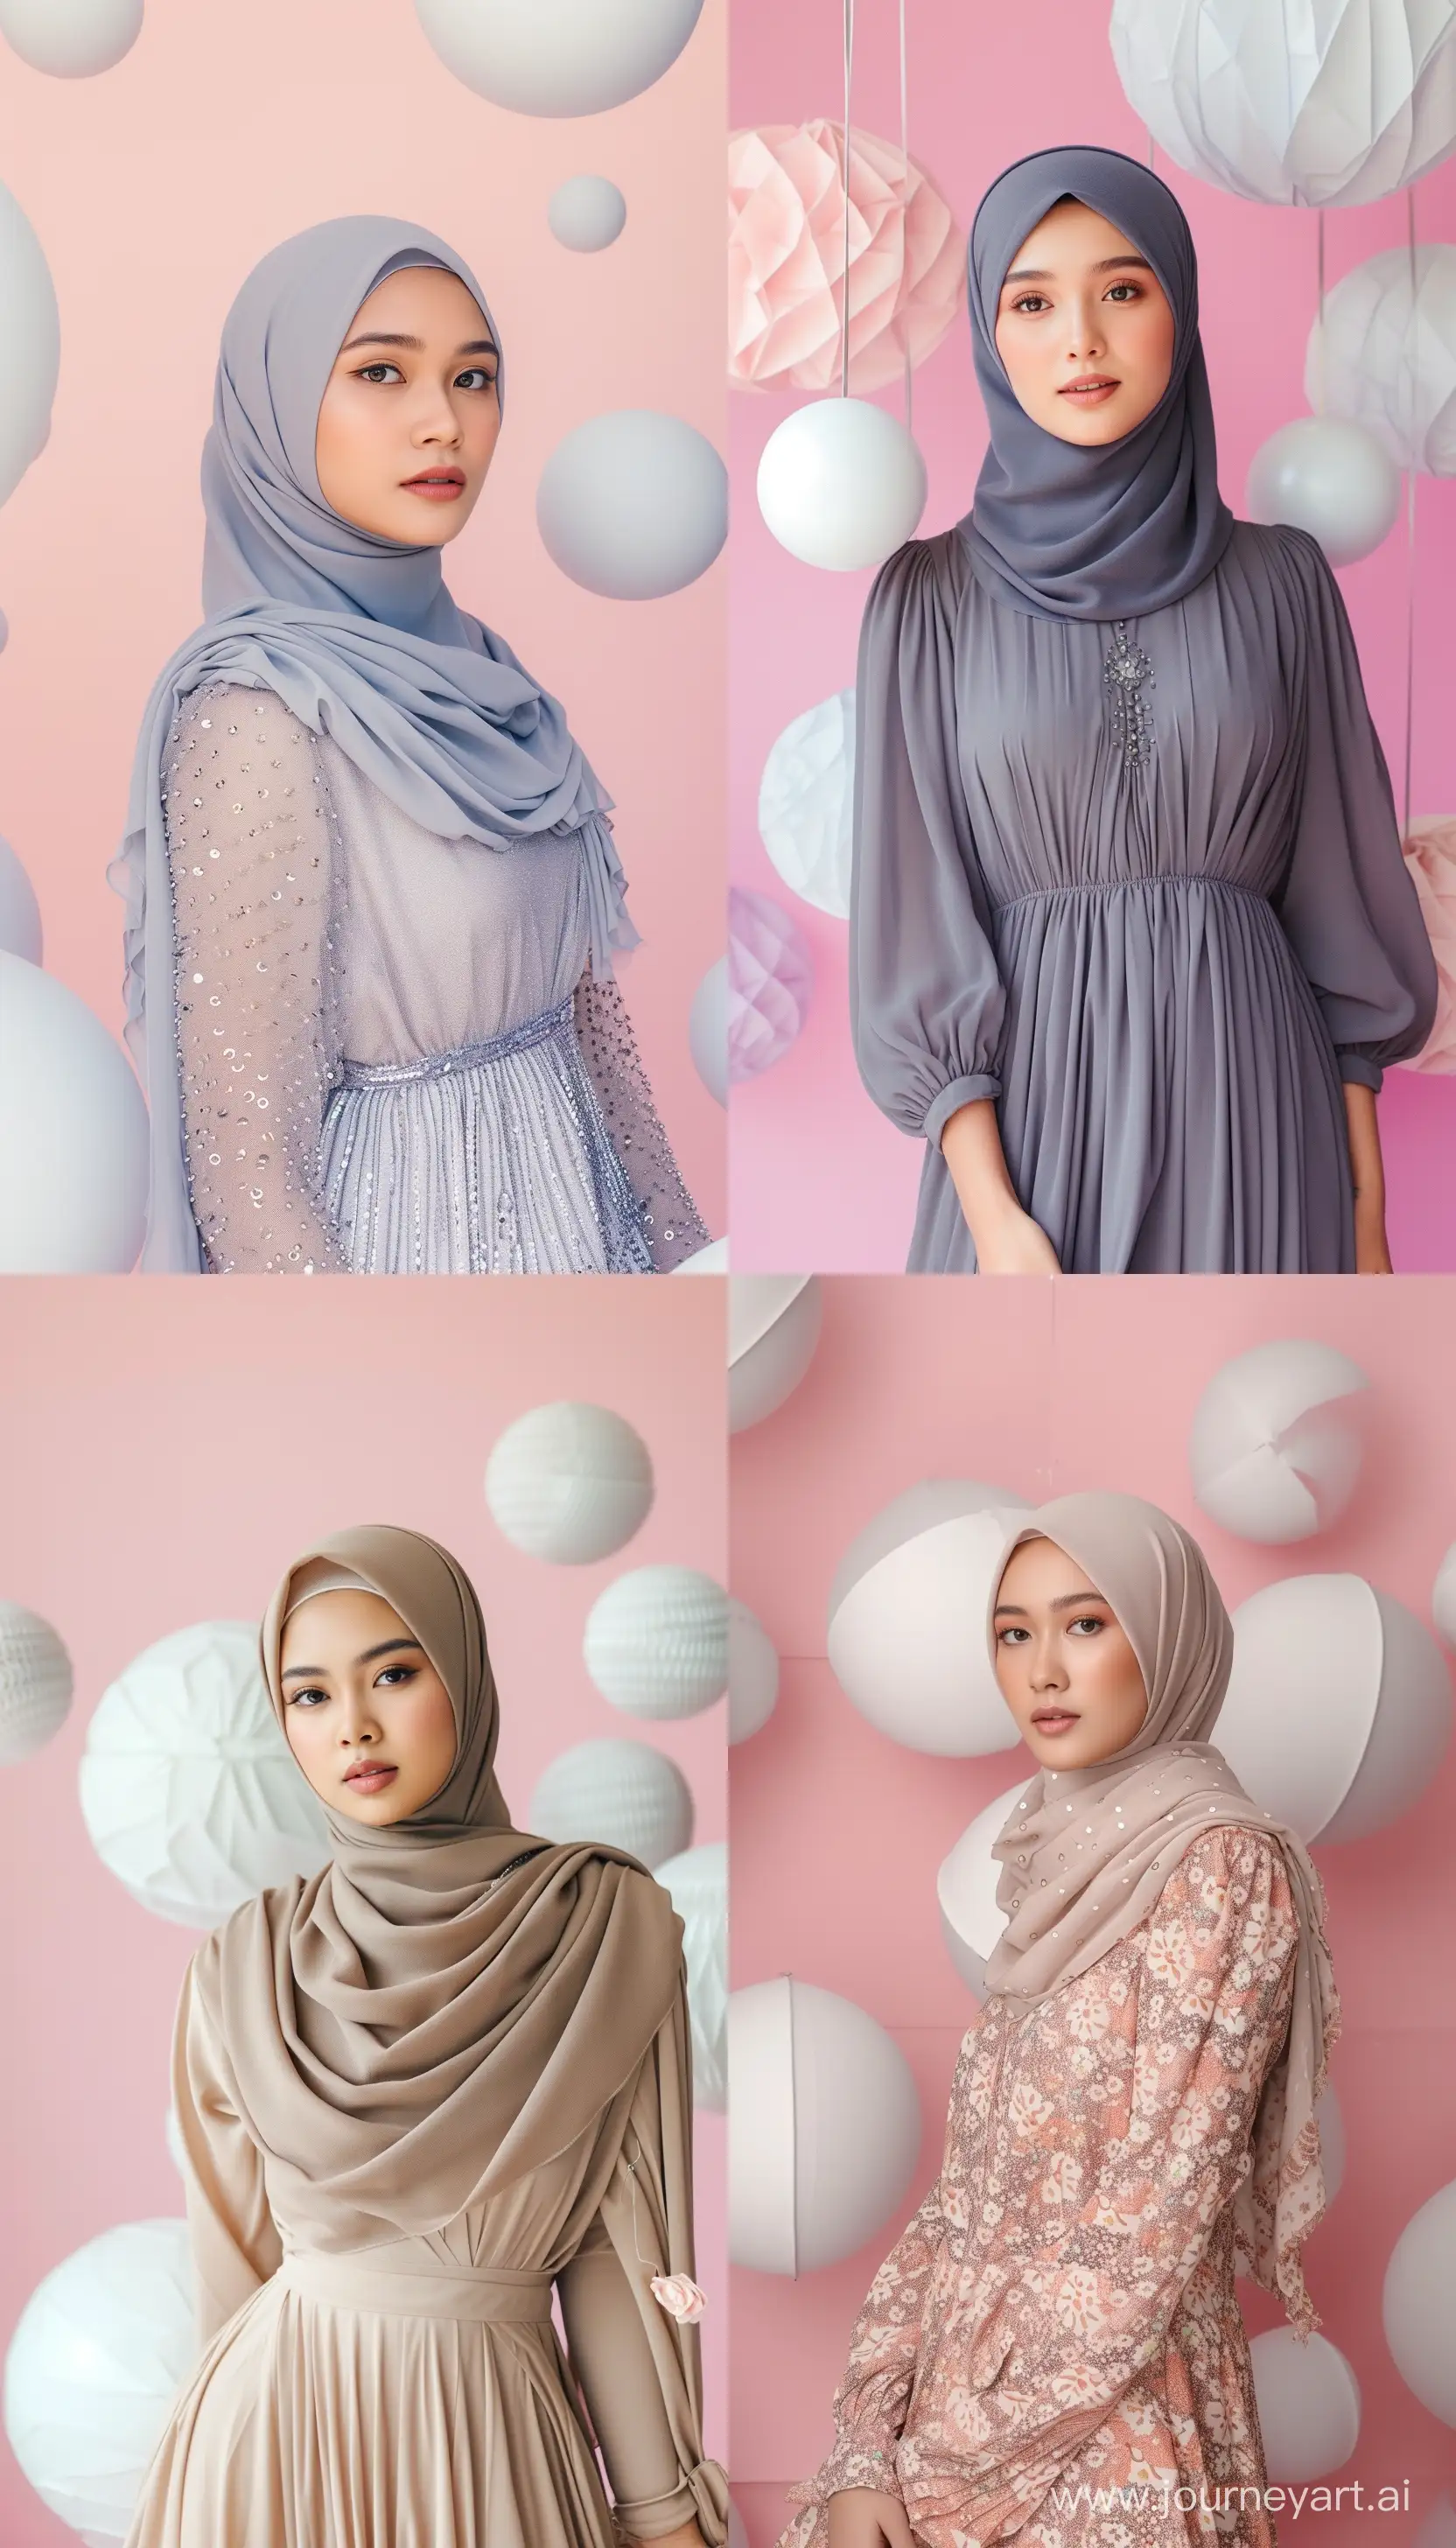 Elegant-Indonesian-Woman-in-Hijab-Dress-Amidst-Divided-Spheres